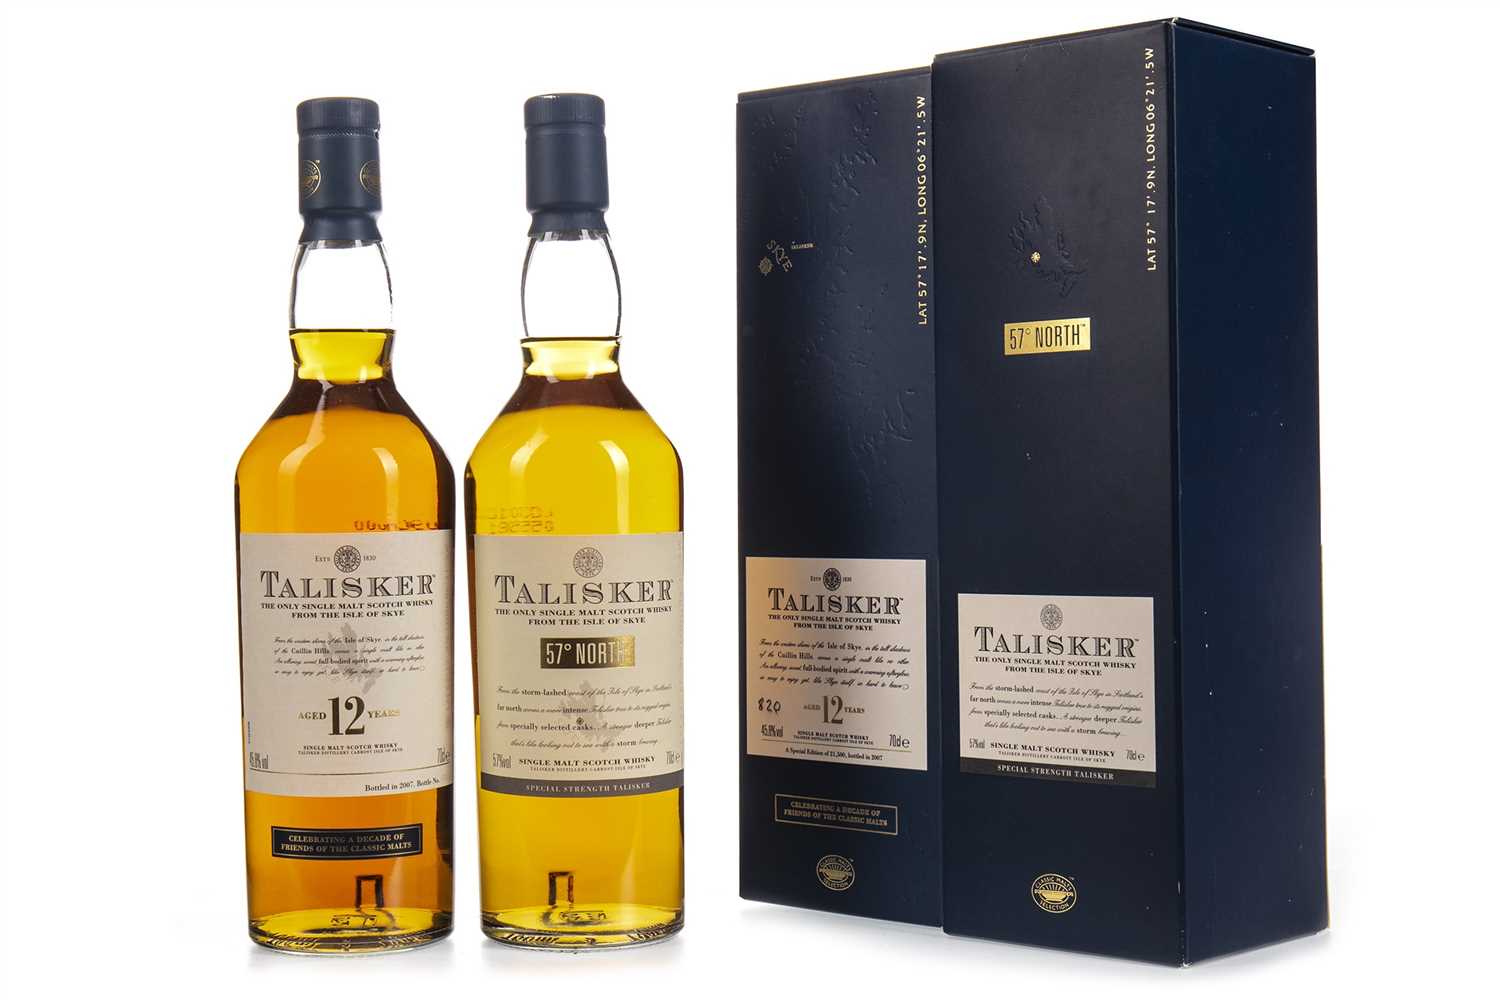 Lot 368 - TALISKER FRIENDS OF THE CLASSIC MALTS 12 YEARS OLD AND 57° NORTH